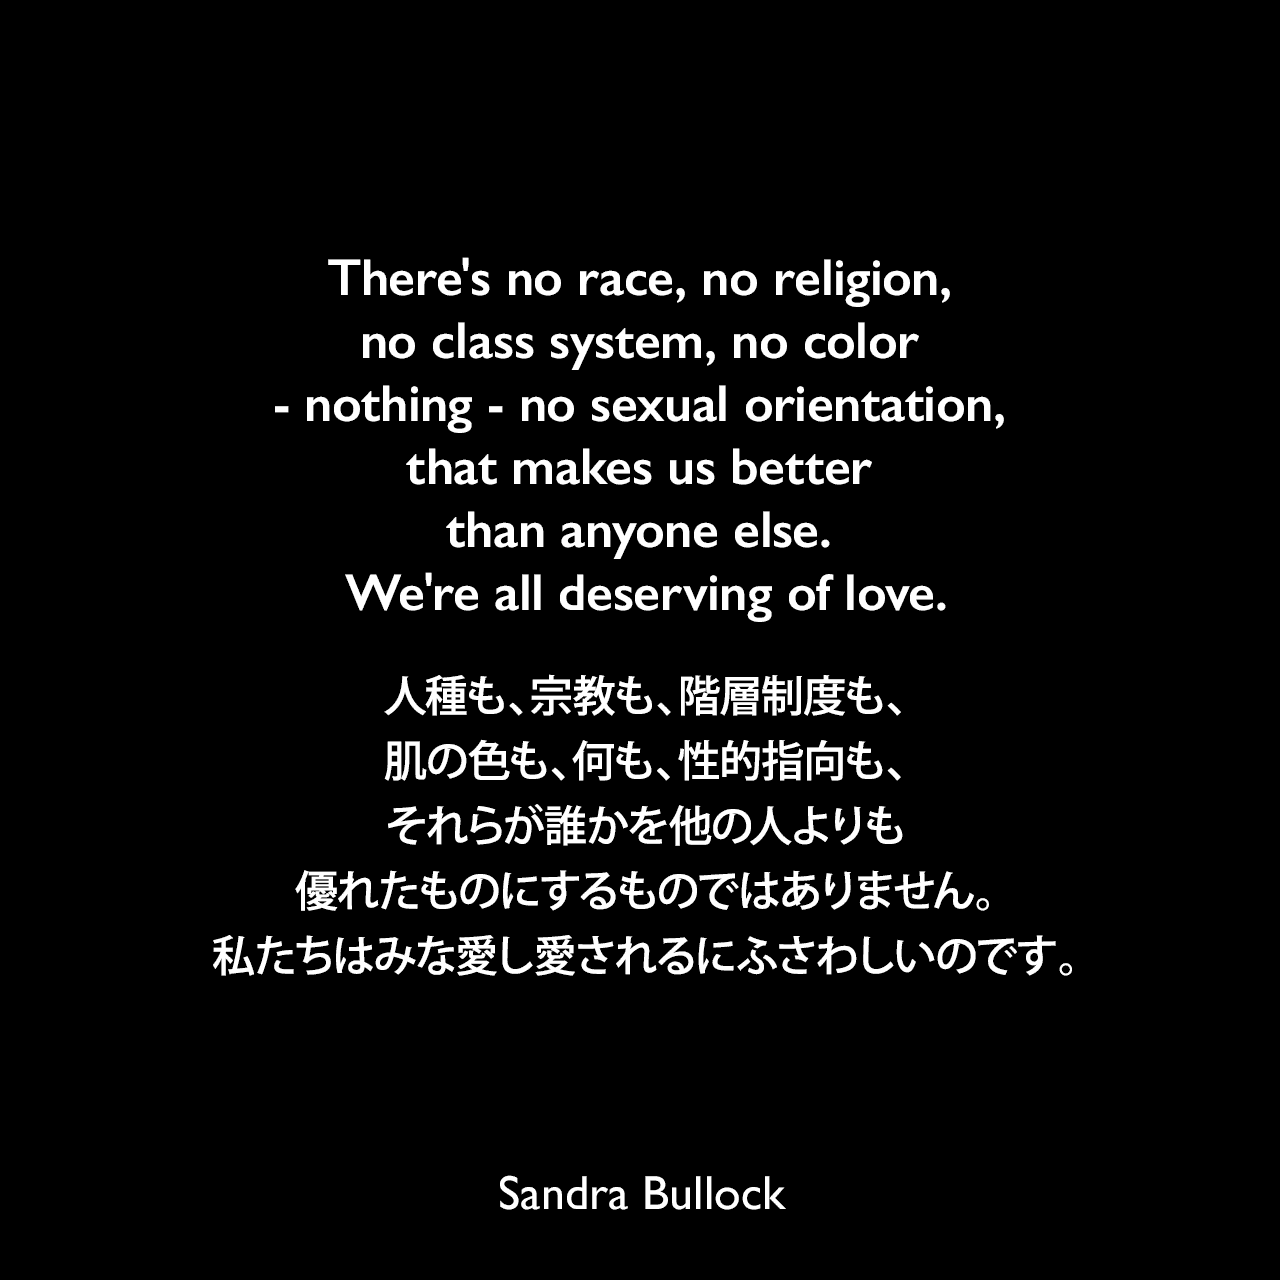 There's no race, no religion, no class system, no color - nothing - no sexual orientation, that makes us better than anyone else. We're all deserving of love.人種も、宗教も、階層制度も、肌の色も、何も、性的指向も、それらが誰かを他の人よりも優れたものにするものではありません。私たちはみな愛し愛されるにふさわしいのです。- 2010年のアカデミー賞主演女優賞授賞式スピーチSandra Bullock